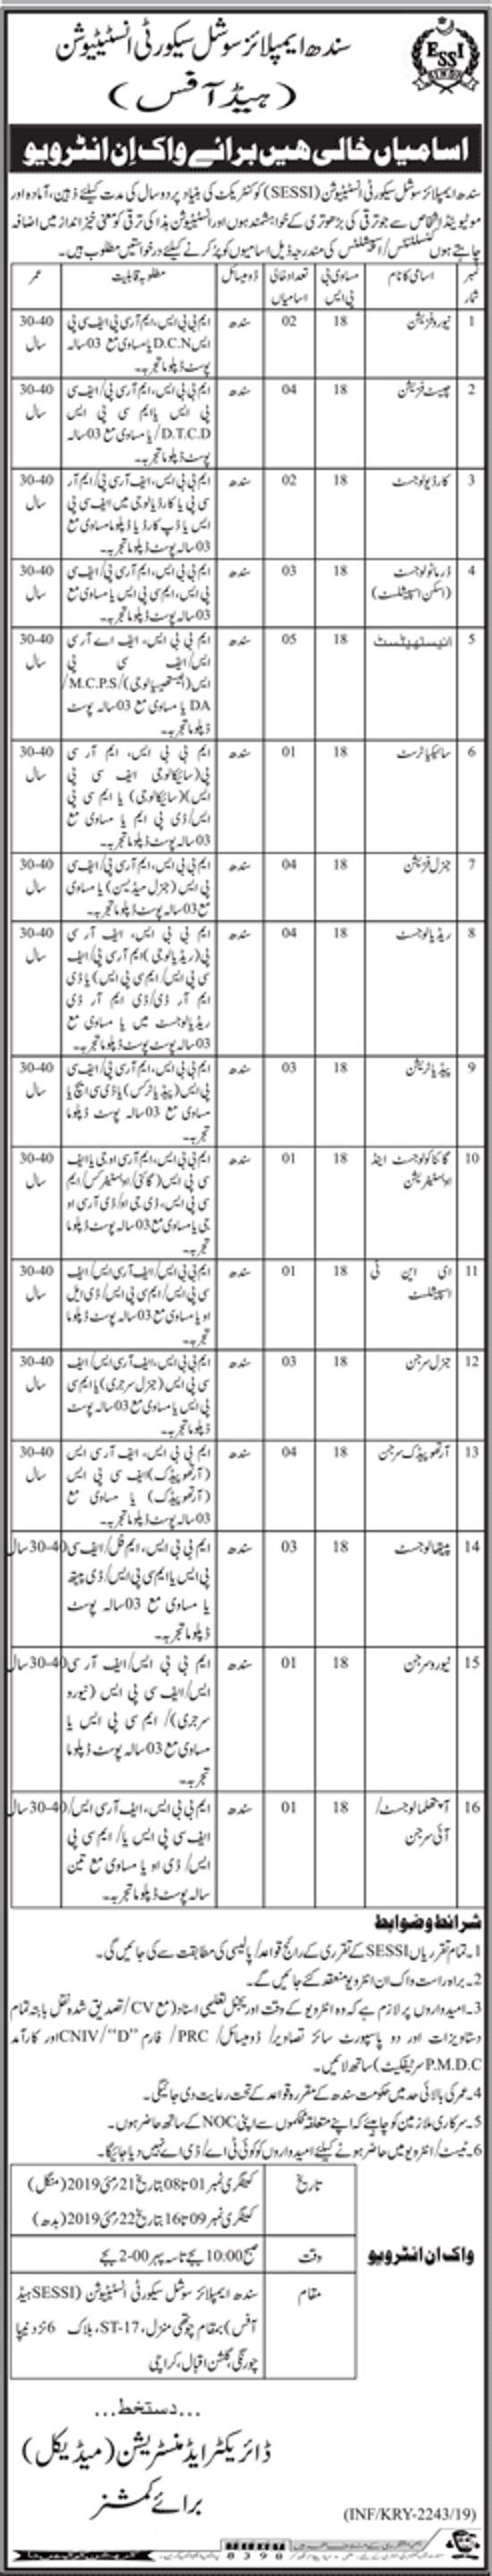 Sindh Employees’ Social Security Institution (SESSI) Jobs 2019 for 42+ Medical / Healthcare Posts (Walk-in Interviews)